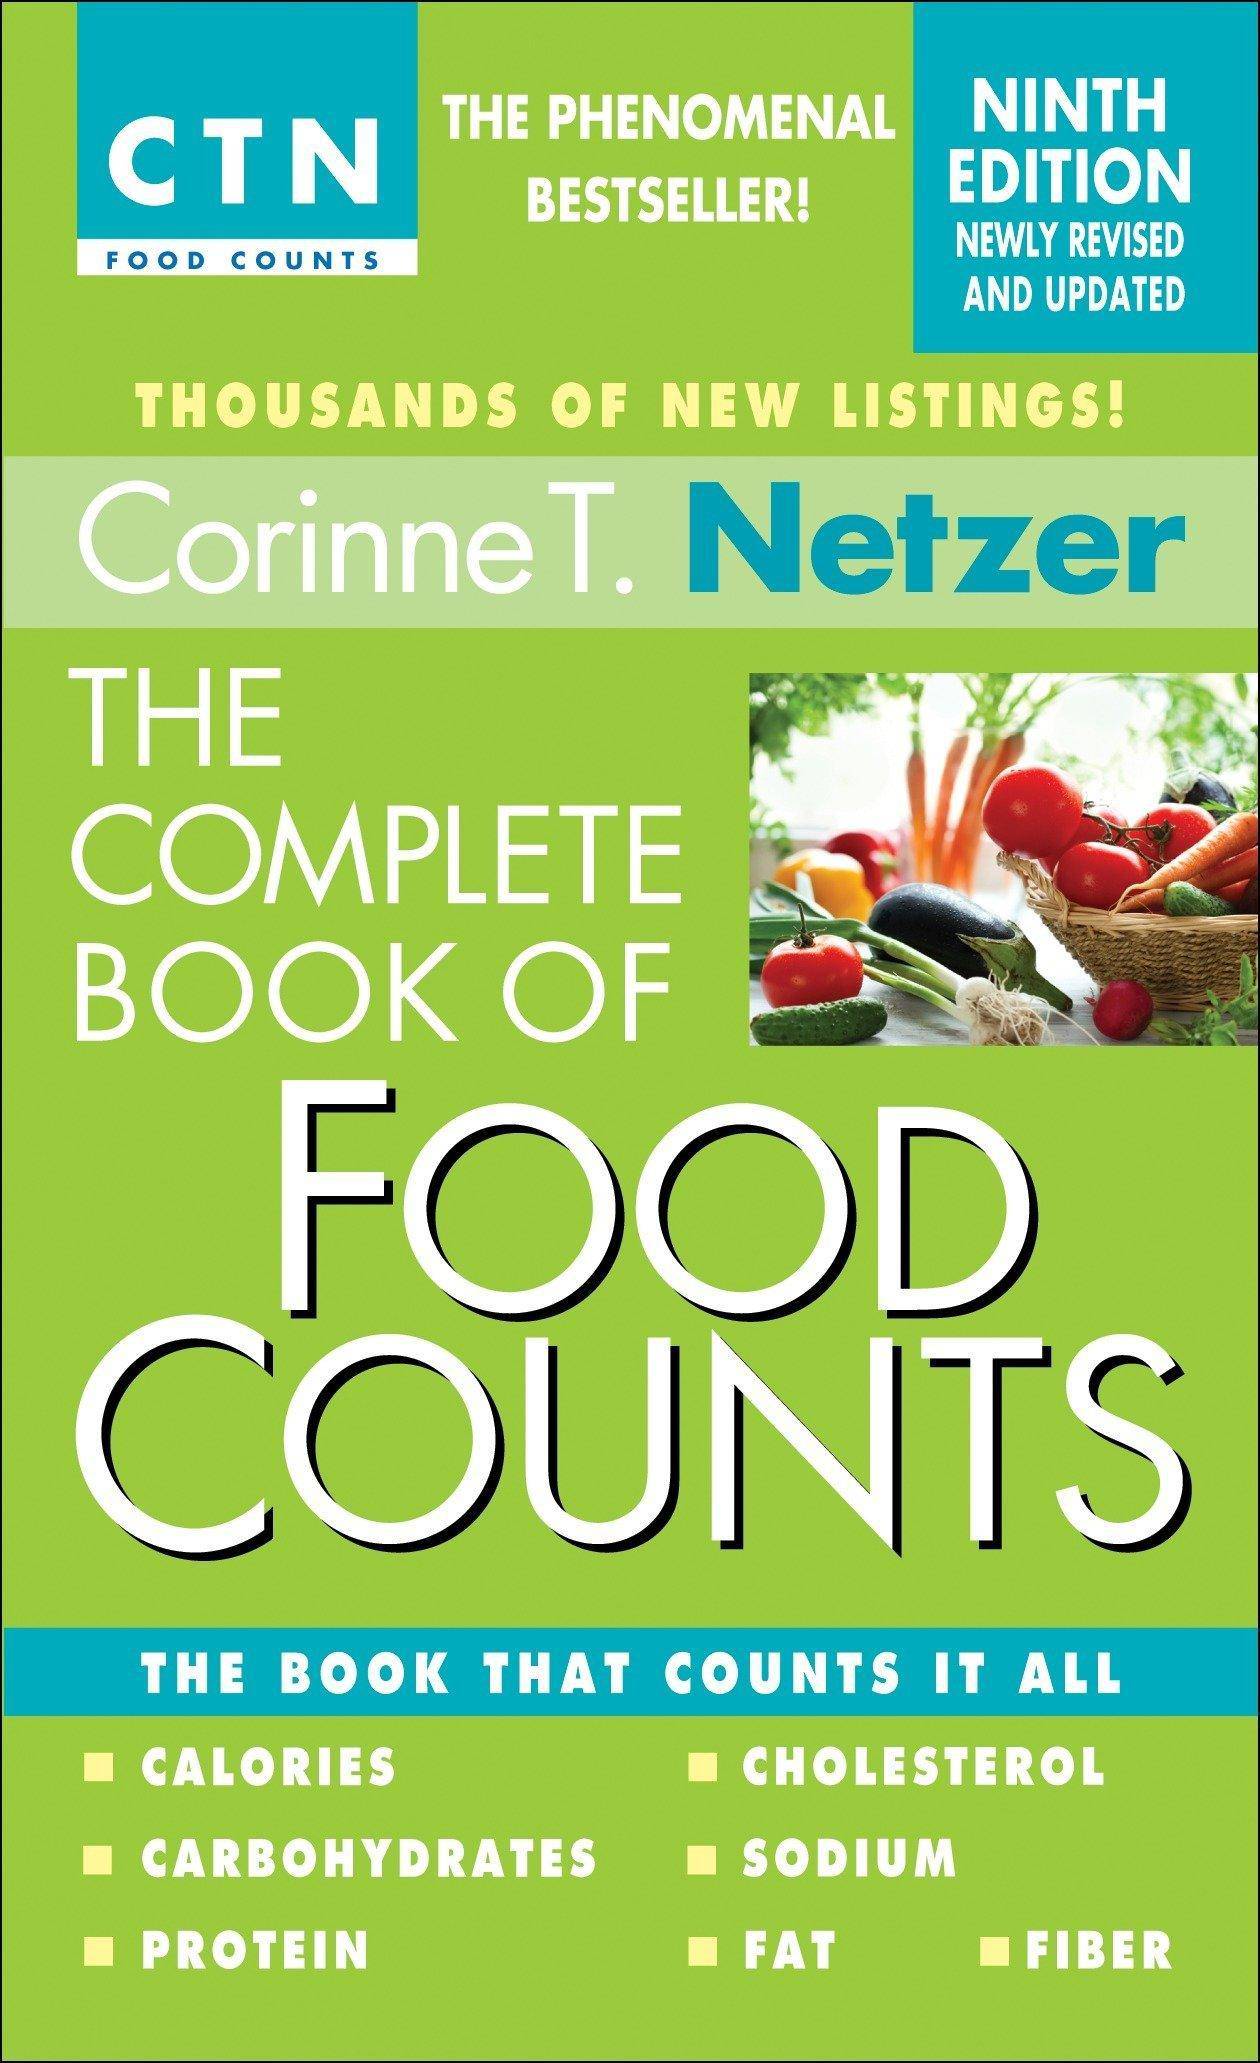 The Complete Book of Food Counts, 9th Edition - SureShot Books Publishing LLC